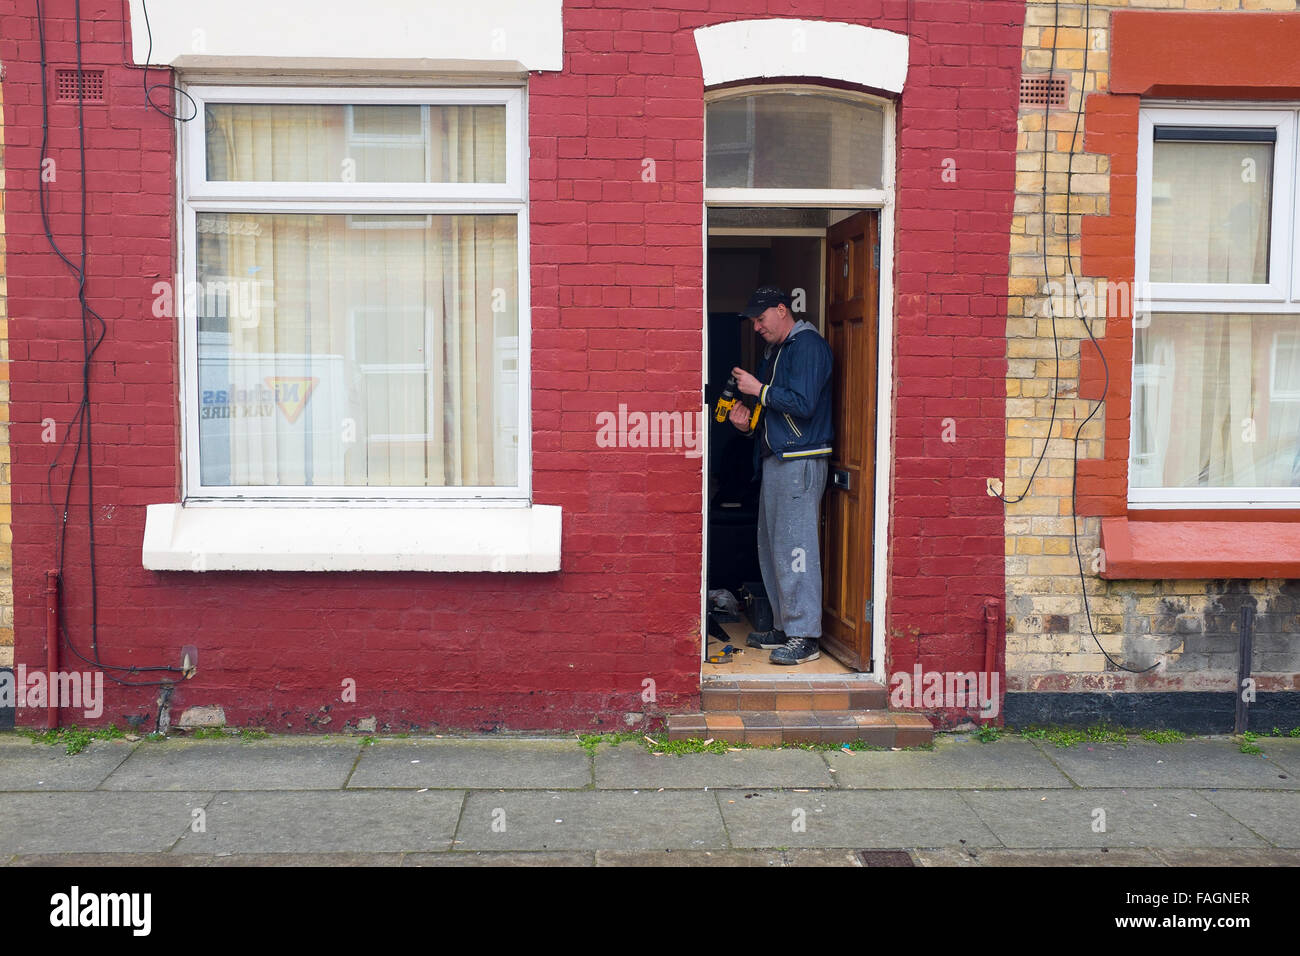 A worker or Landlord repairs the door frame of a terraced rental house on Wendell street in Liverpool 8, making improvements. Stock Photo